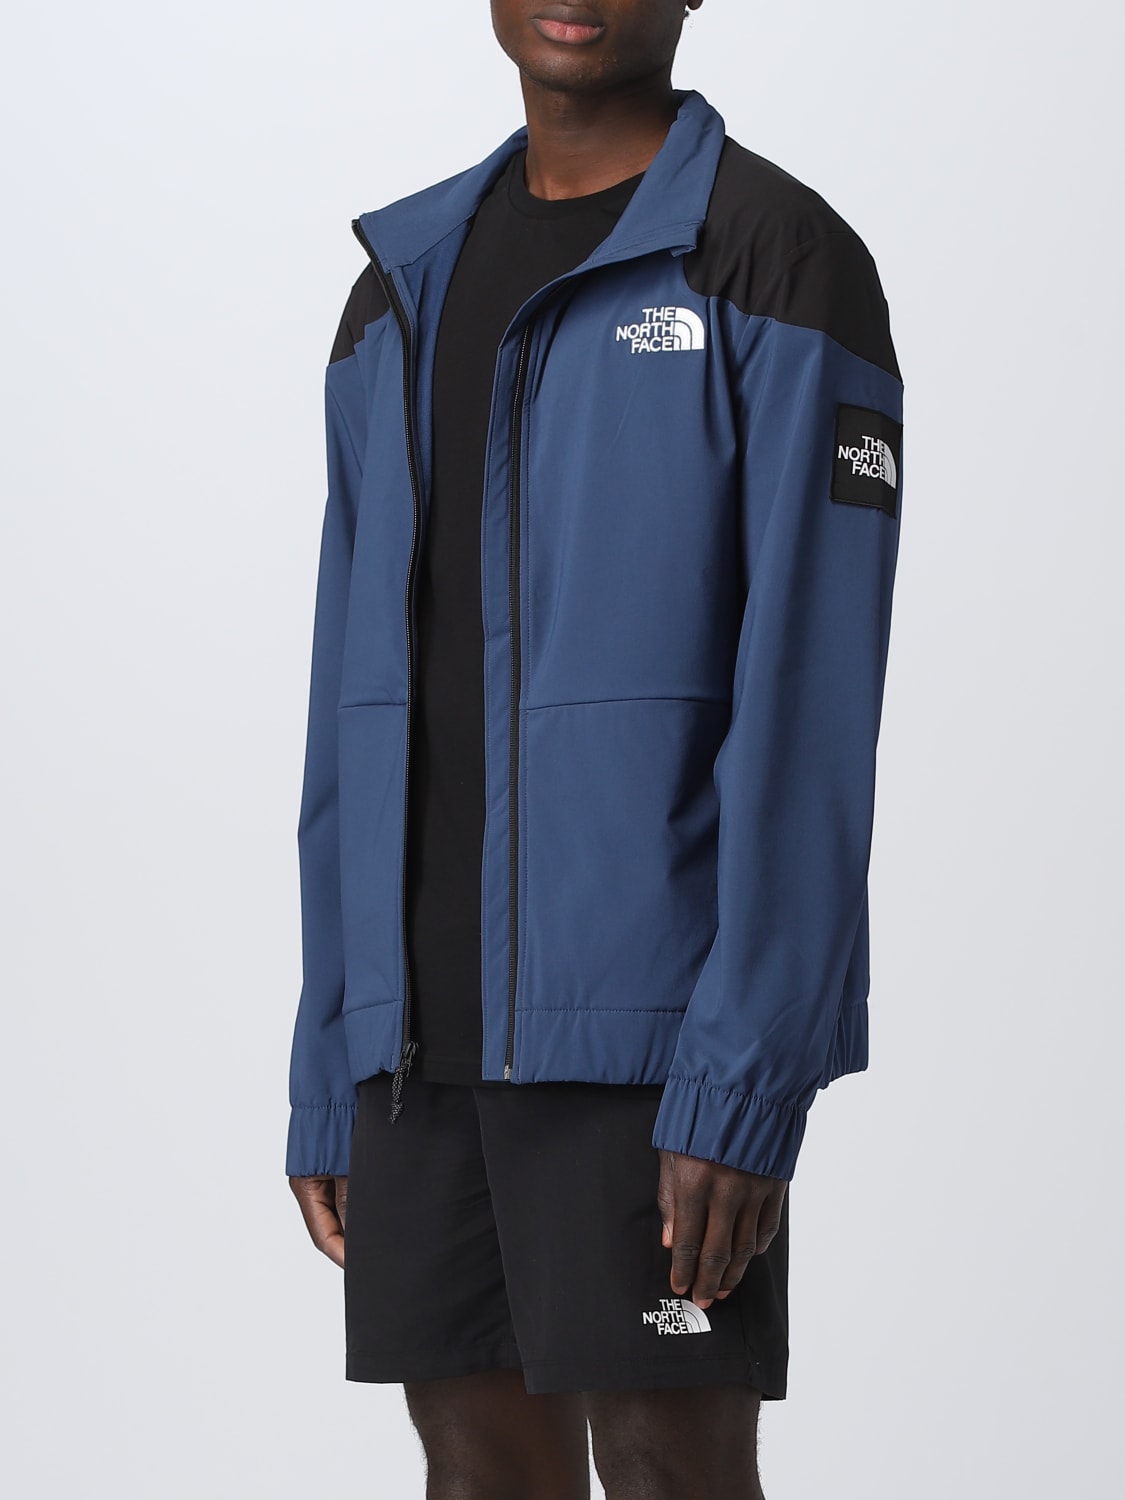 Giacca The North Face: Giacca Carduelis The North Face in nylon blue 2